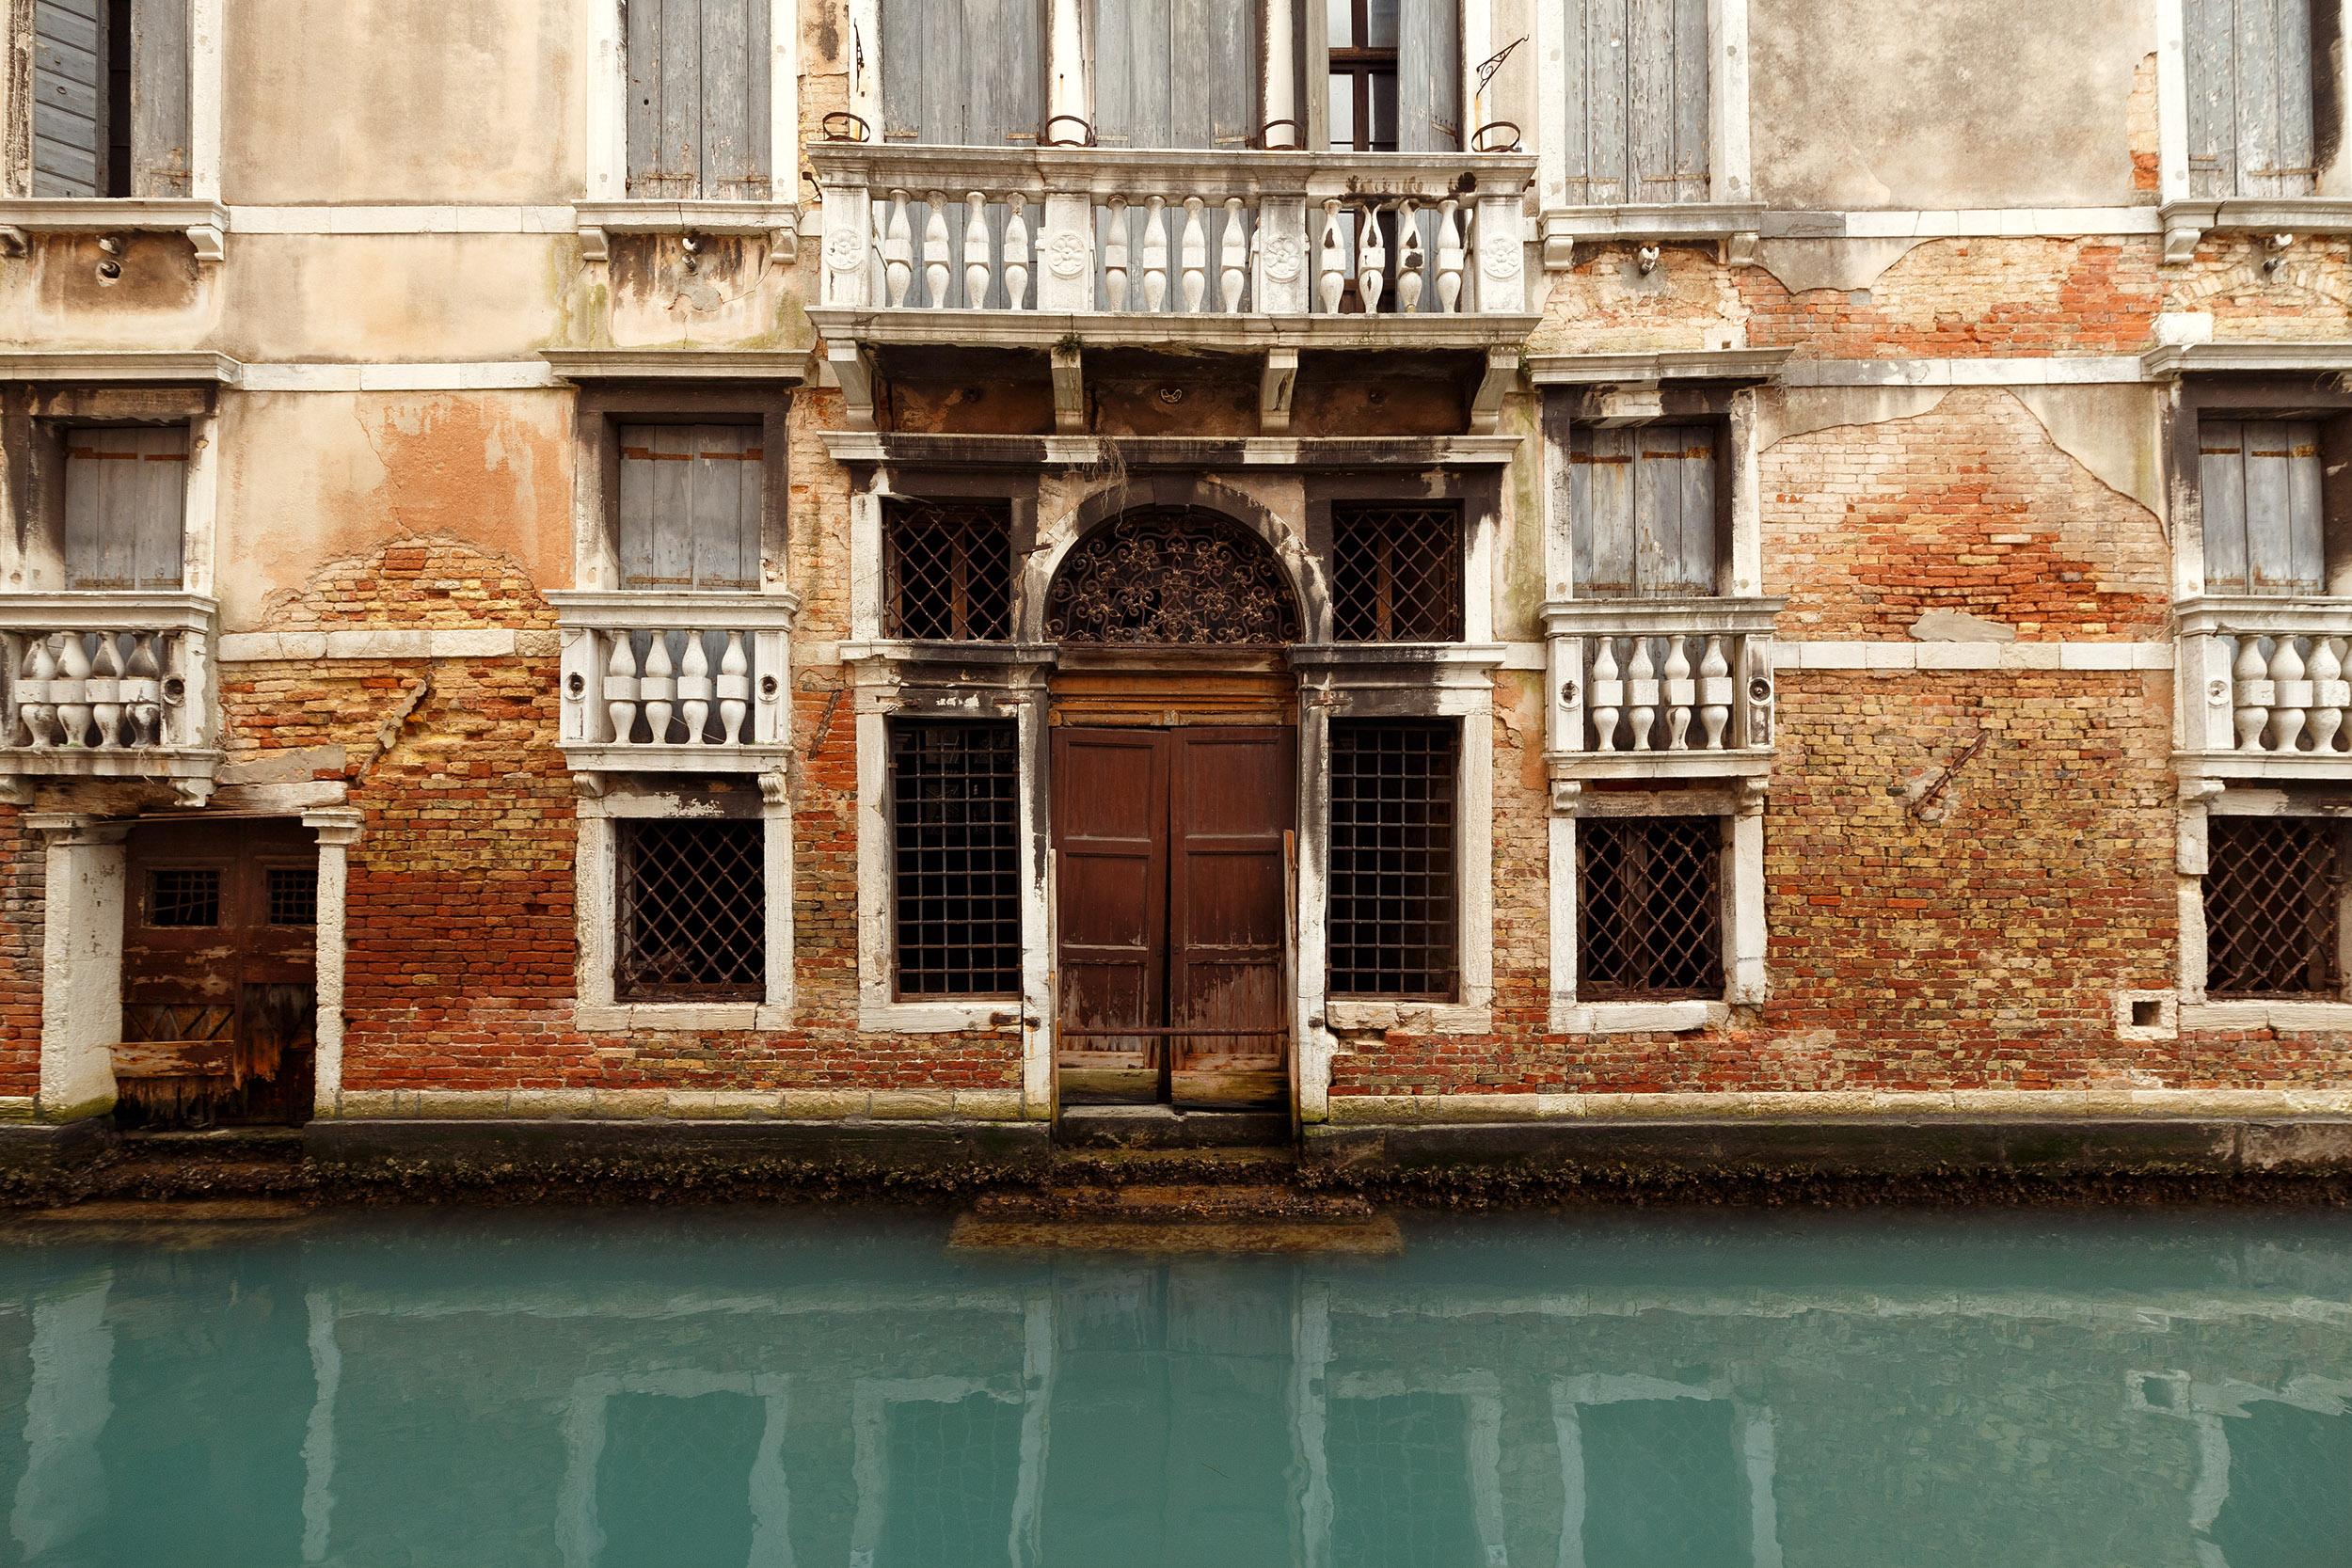 "Palazzo Veneziano", photography by Dimitri Bourriau. Print mounted on aluminum with plexiglas, framed. Edition of 15.

Dimitri Bourriau is a French photographer, he has always been interested in history and architectural remains. He explores the